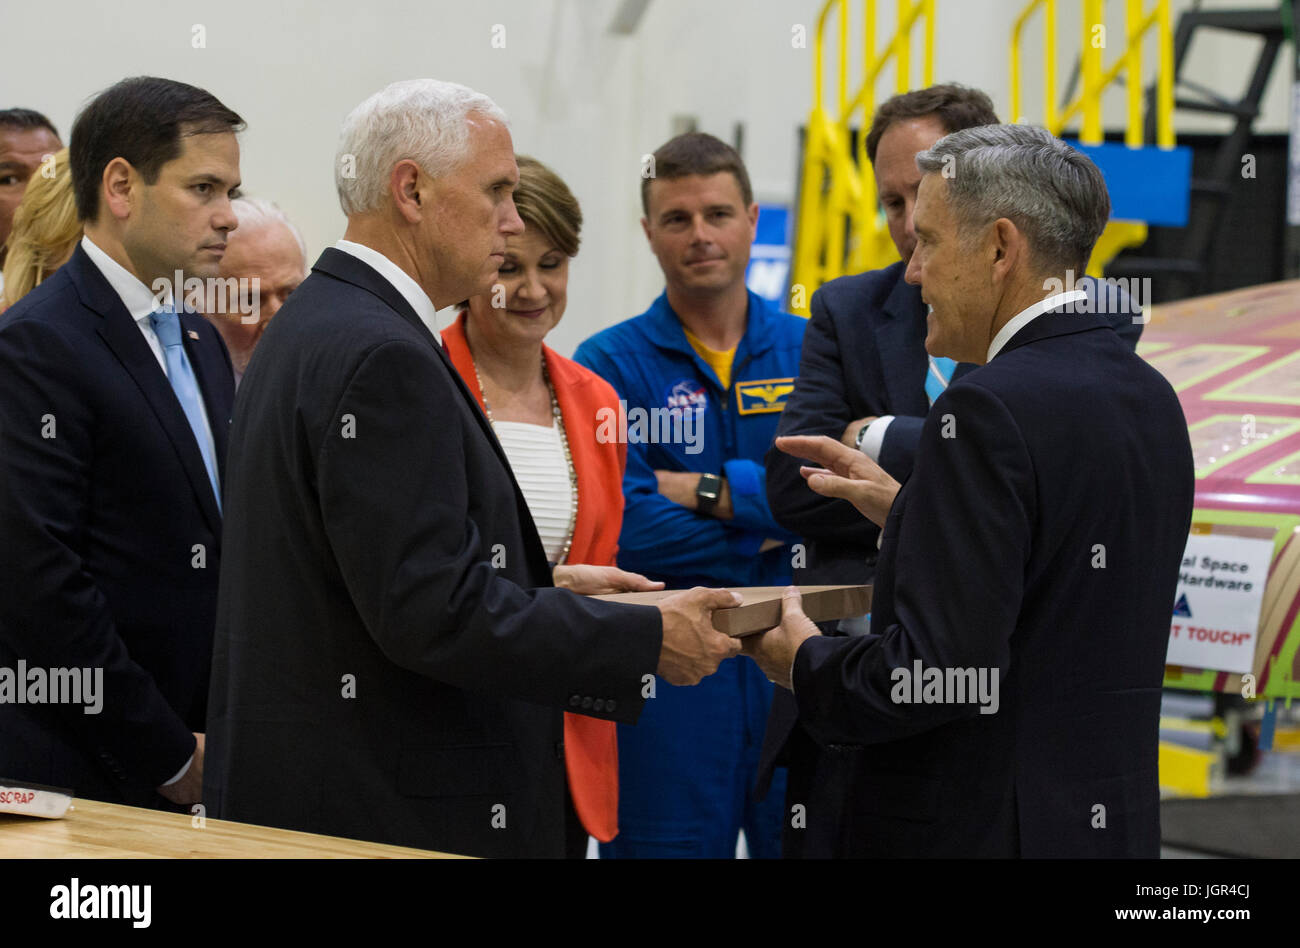 In this photo released by the National Aeronautics and Space Administration (NASA) United States Vice President Mike Pence, left, looks at a component of Orion's heat shield during a visit to the Operations and Checkout Building at Kennedy Space Center (KSC) on Thursday, July 6, 2017 in Cape Canaveral, Florida. Looking on from left is US Senator Marco Rubio (Republican of Florida). Mandatory Credit: Aubrey Gemignani/NASA via CNP /MediaPunch Stock Photo